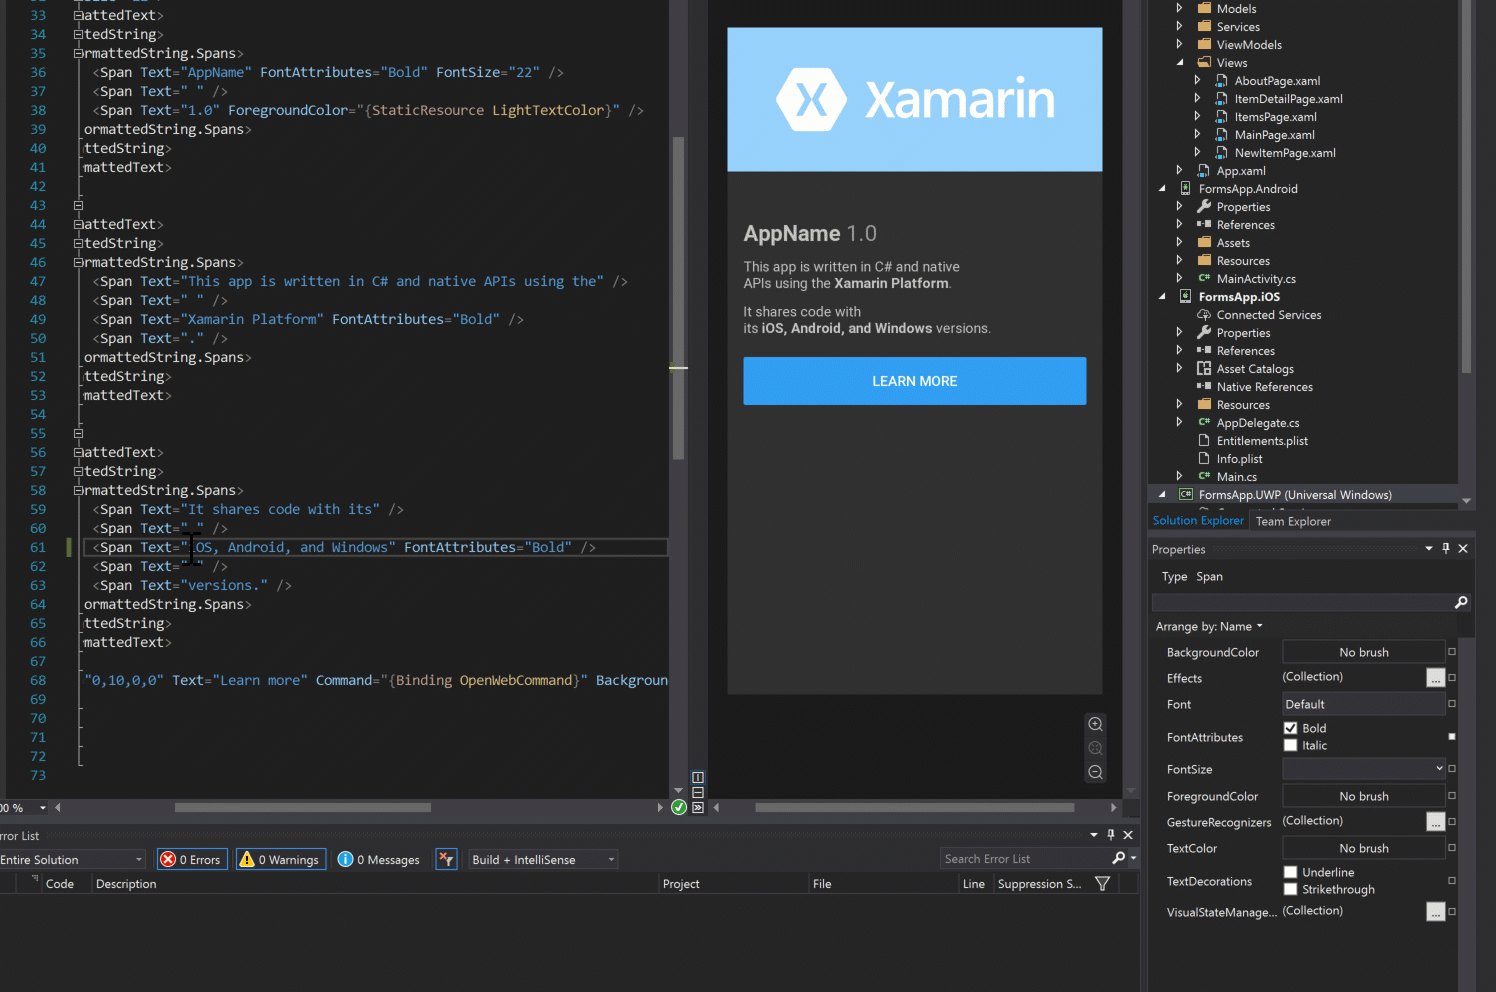 xamarin for visual studio 3.11.1537 or greater.